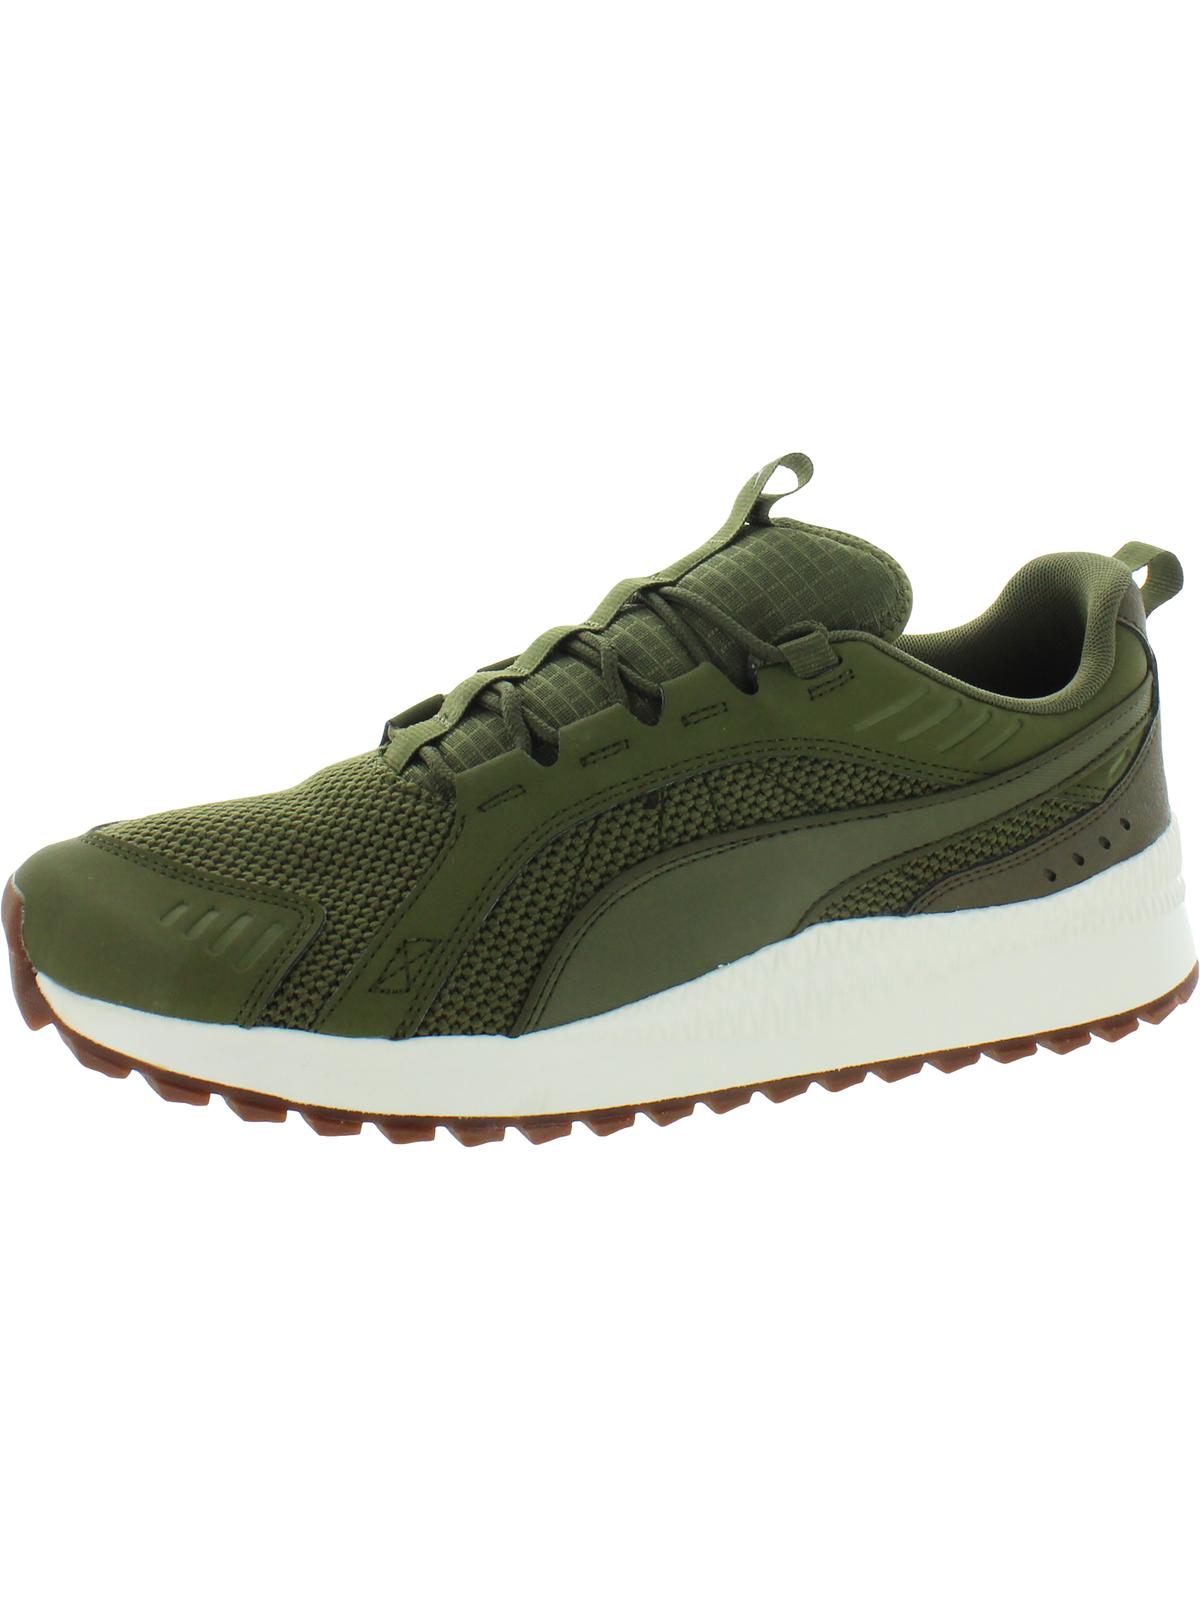 Puma Mens Pacer Next R Fitness Workout Athletic Shoes Green 12 Medium (D) - image 1 of 2